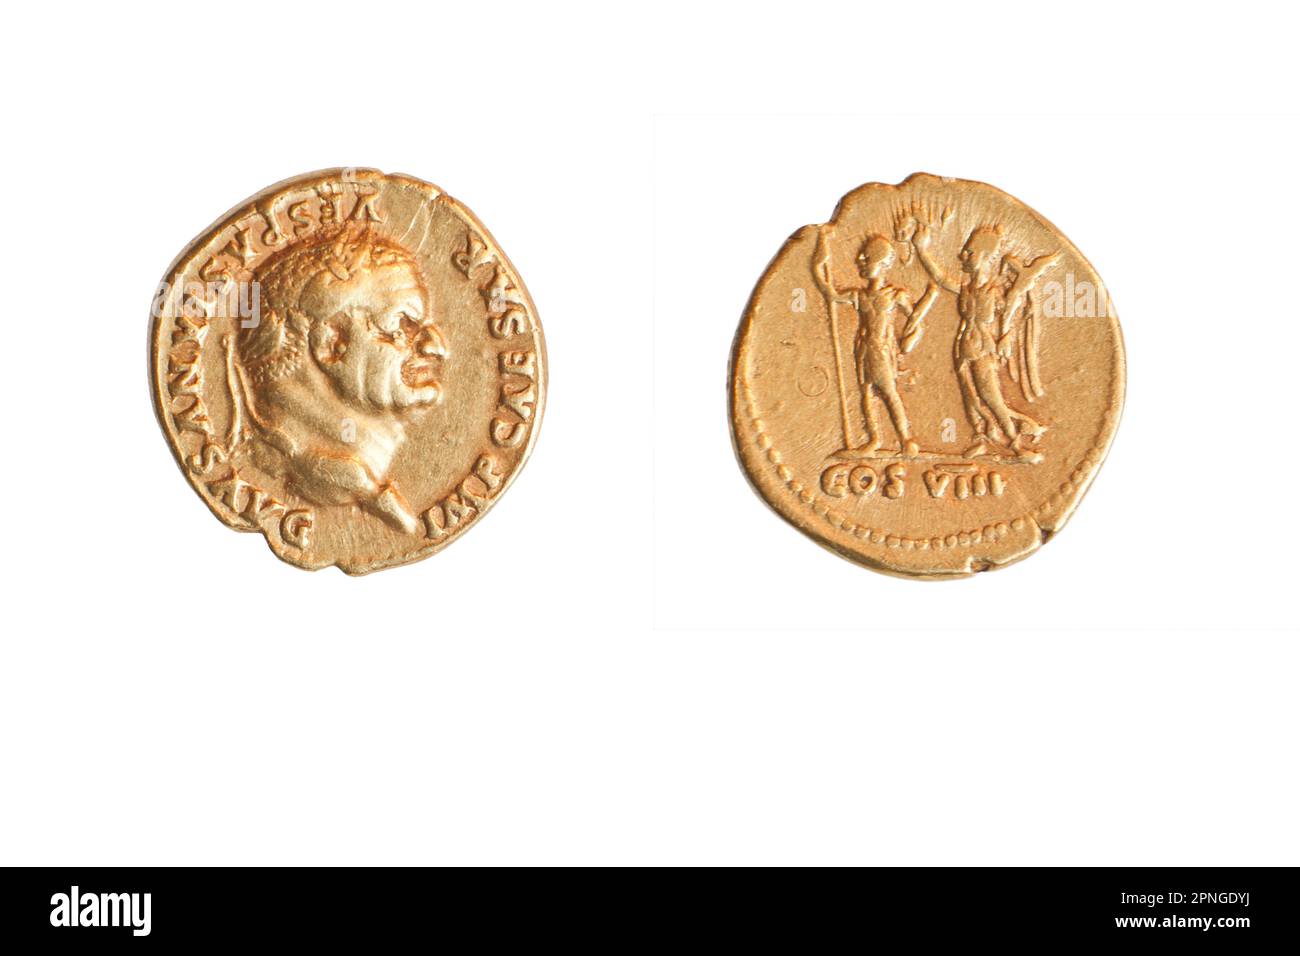 The Emperor and Nike. Roman gold coin depicting emperor Vespasian 69-79 CE (private collection) Stock Photo